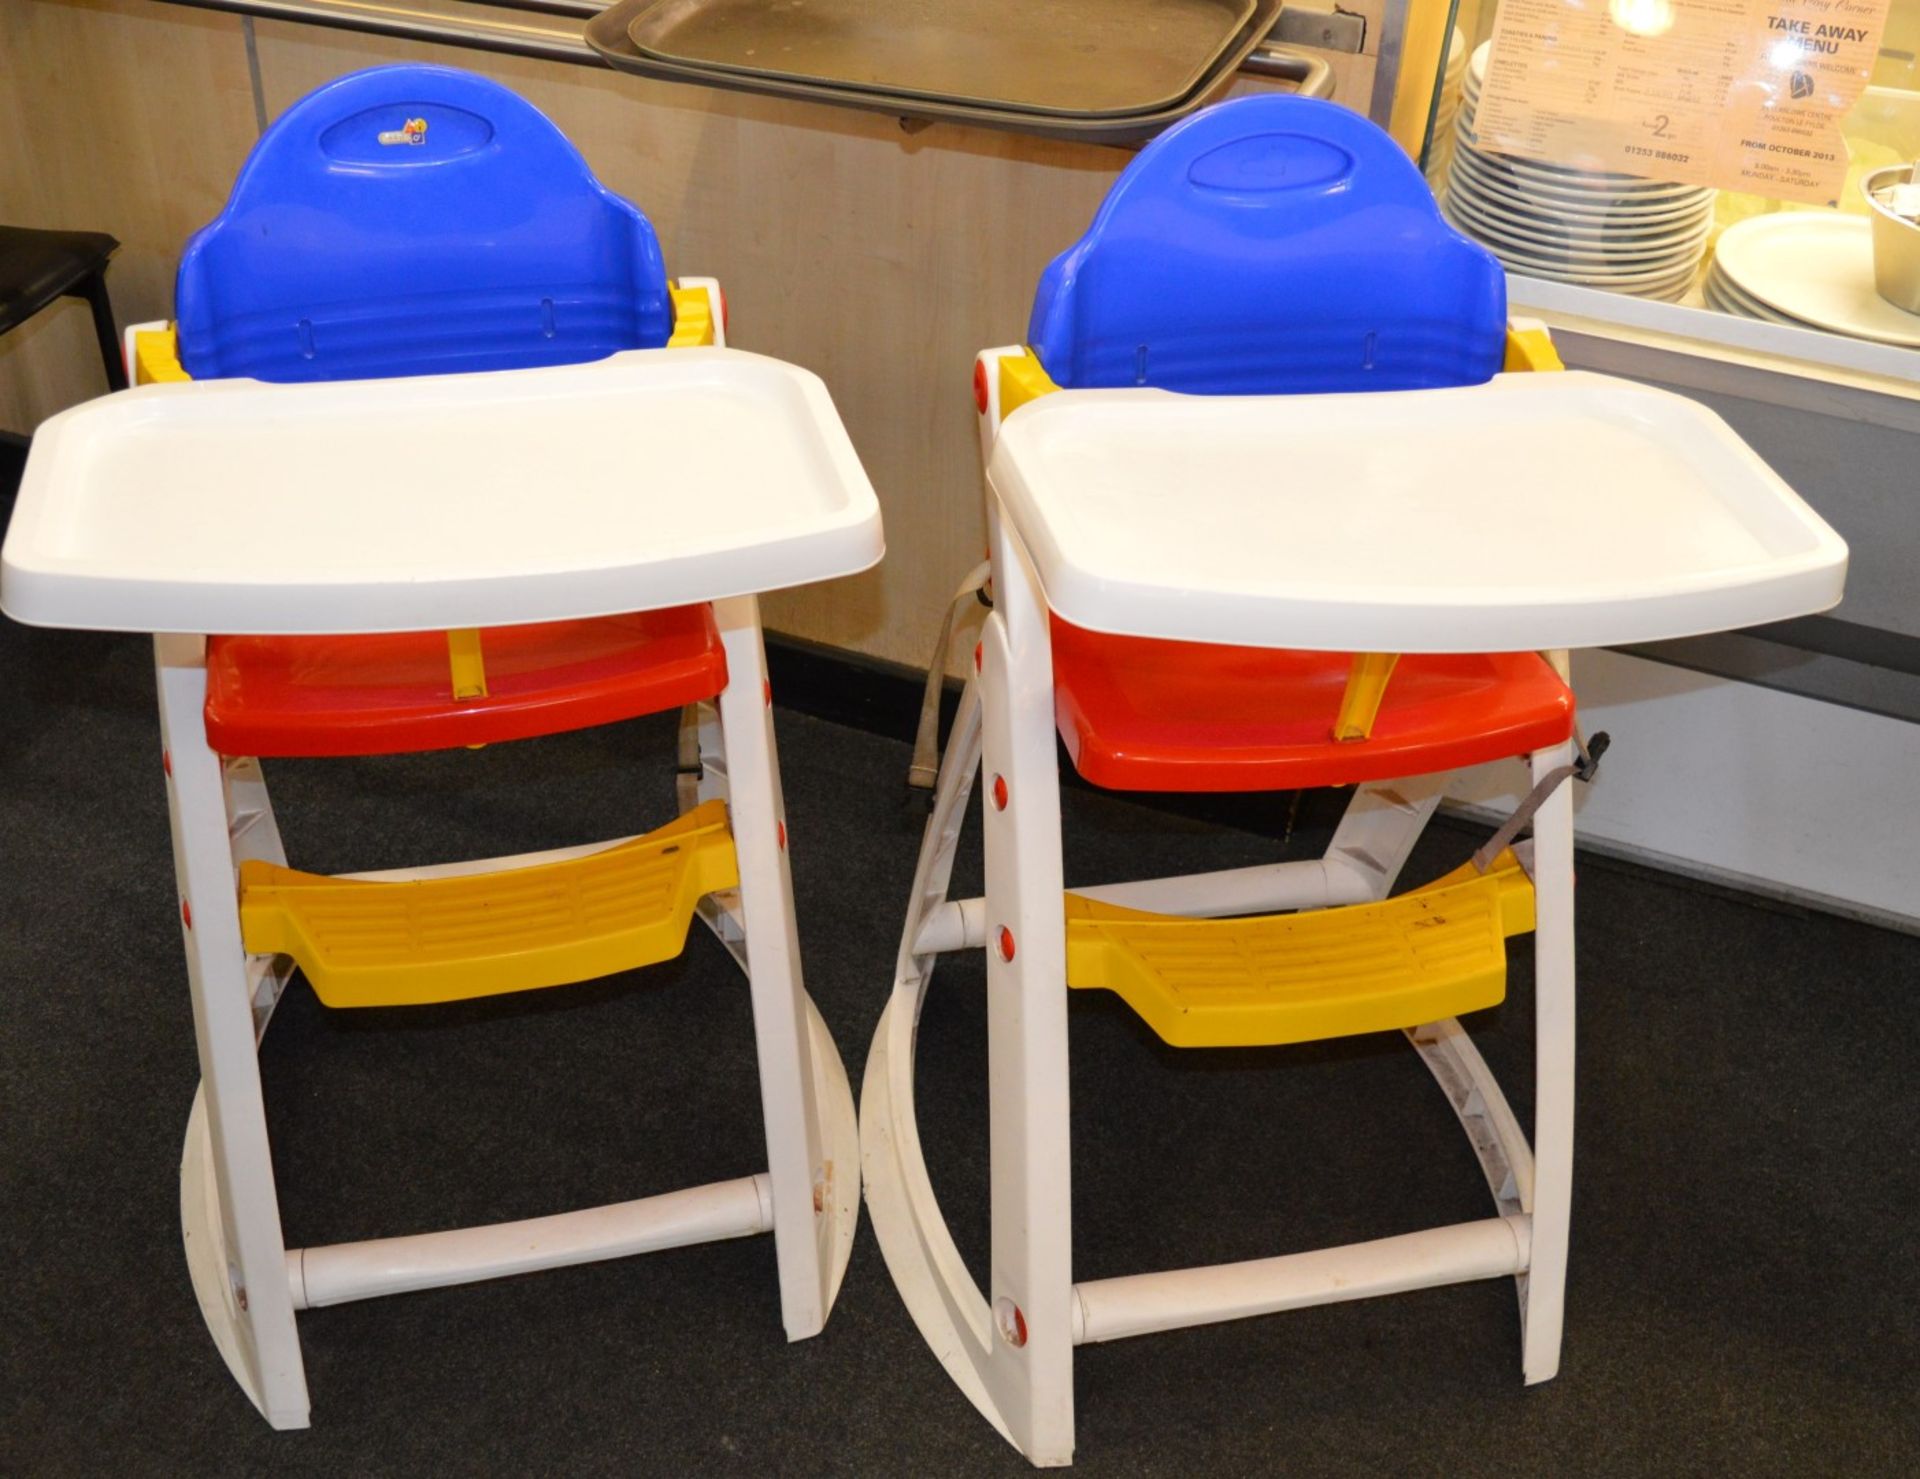 2 x Childrens High Chairs - K&D Design - Colourful Design - 3 Stage Highchair, Yourth Chair and - Image 2 of 4